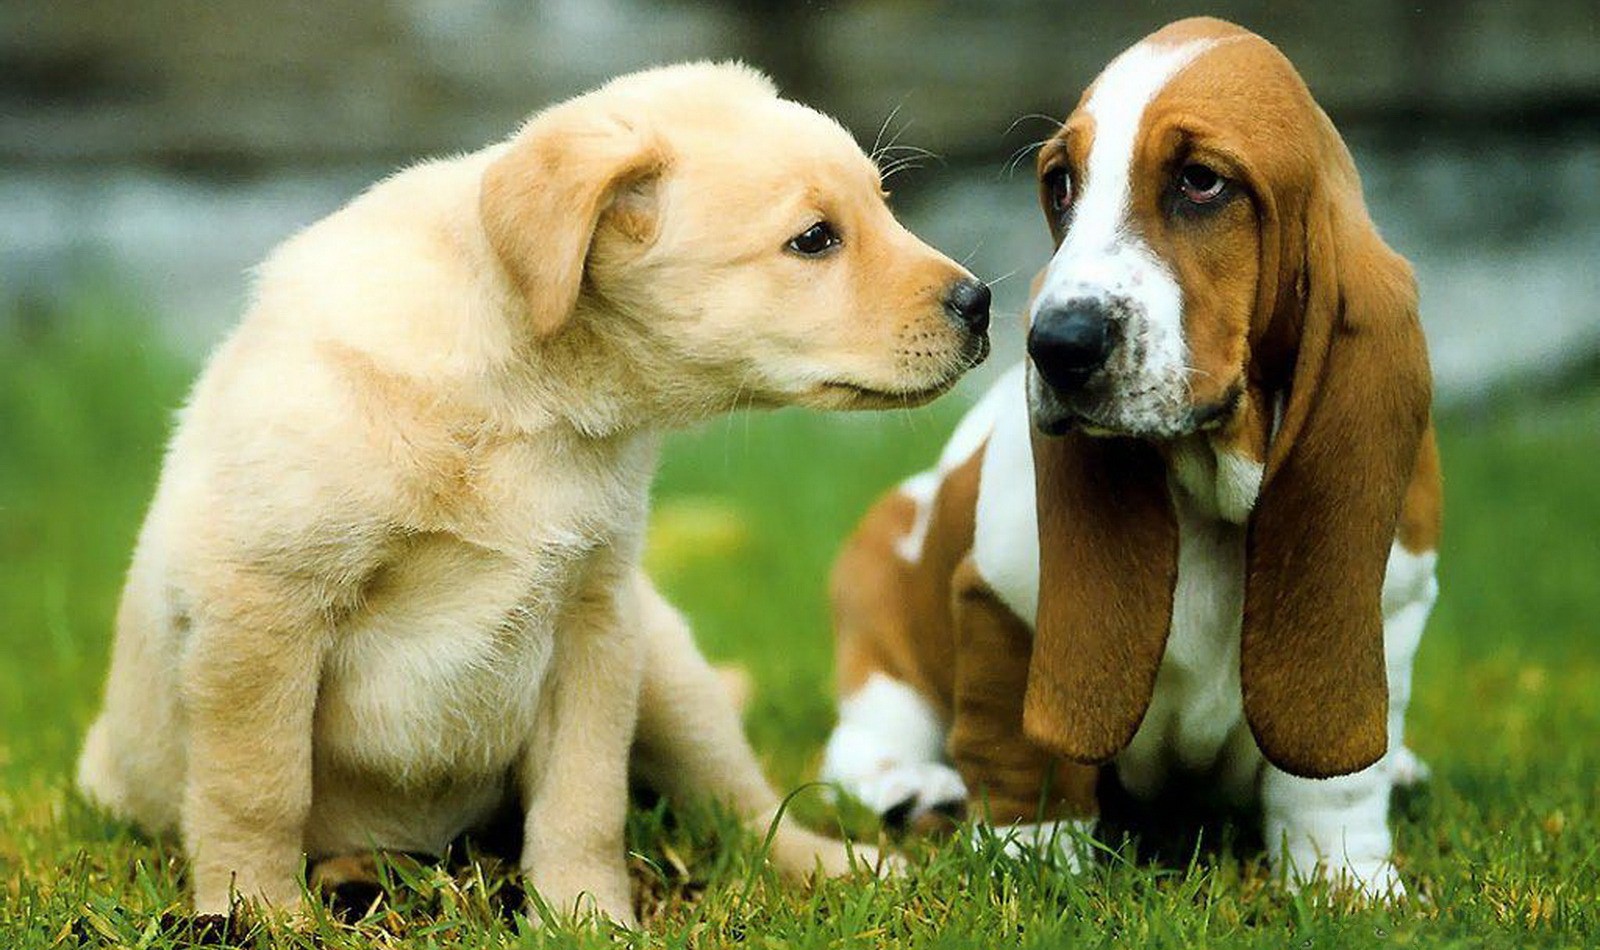 Puppy Basset Hound With Indian Sweet Dog - Handle Every Stressful Situation Like A Dog Quote - HD Wallpaper 